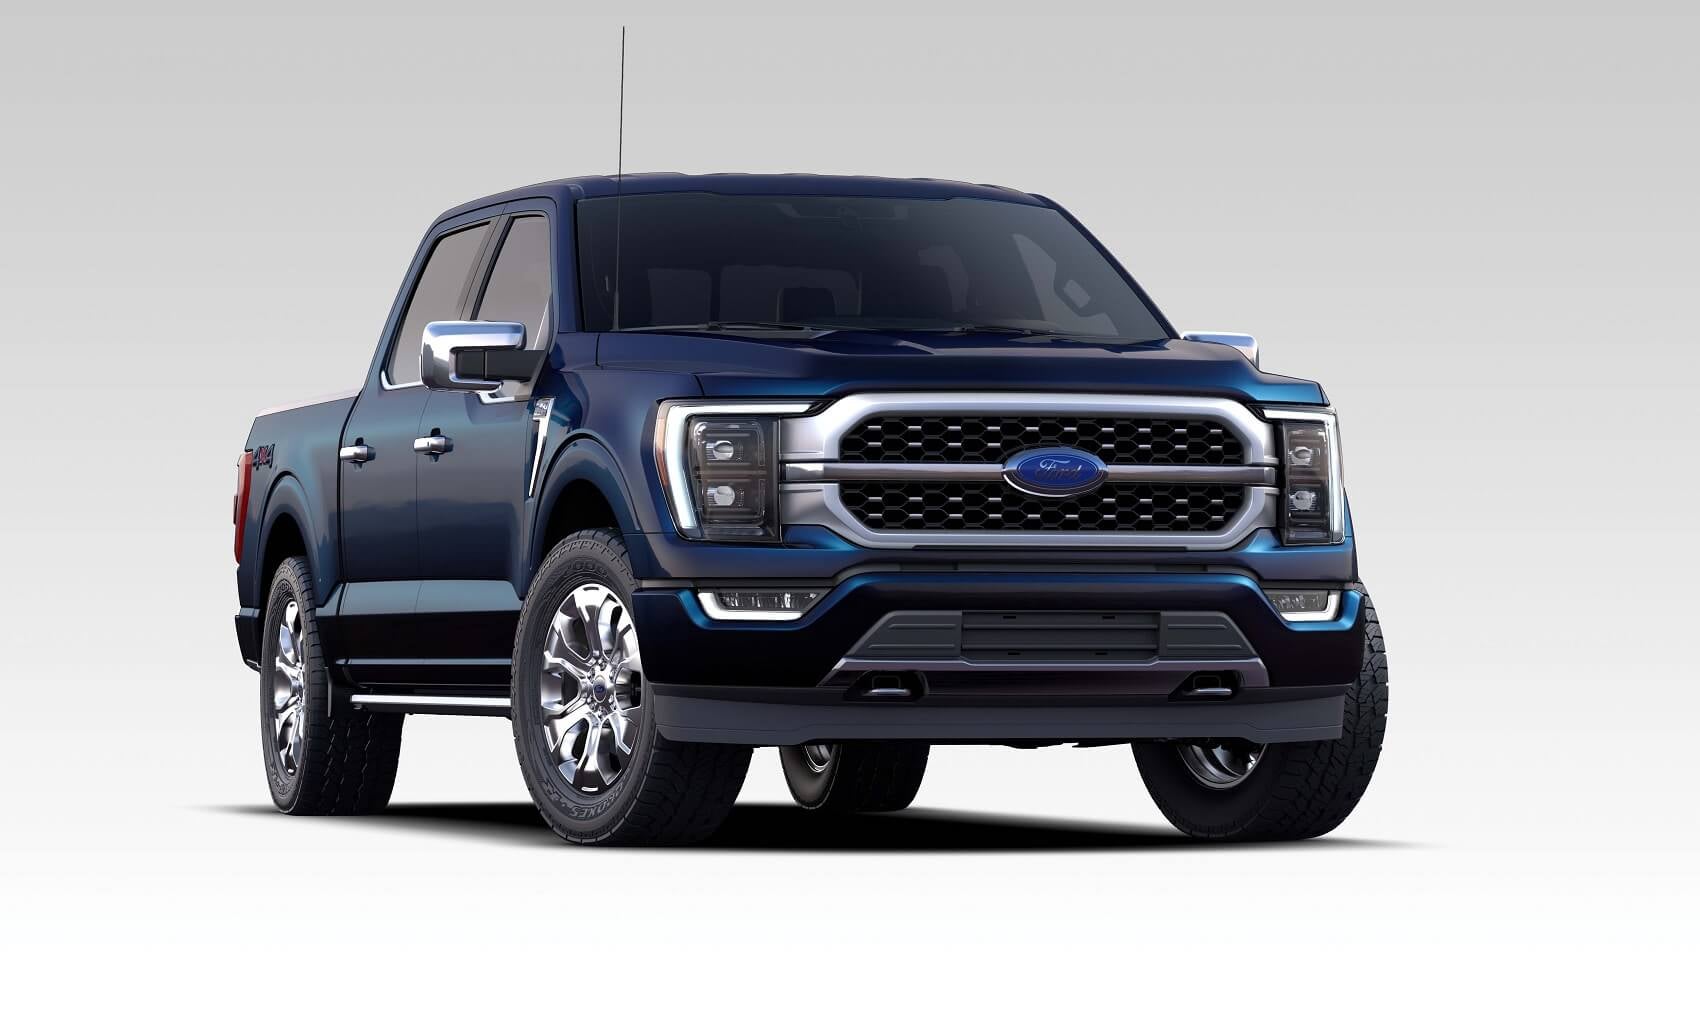 2021 Ford F-150 Review